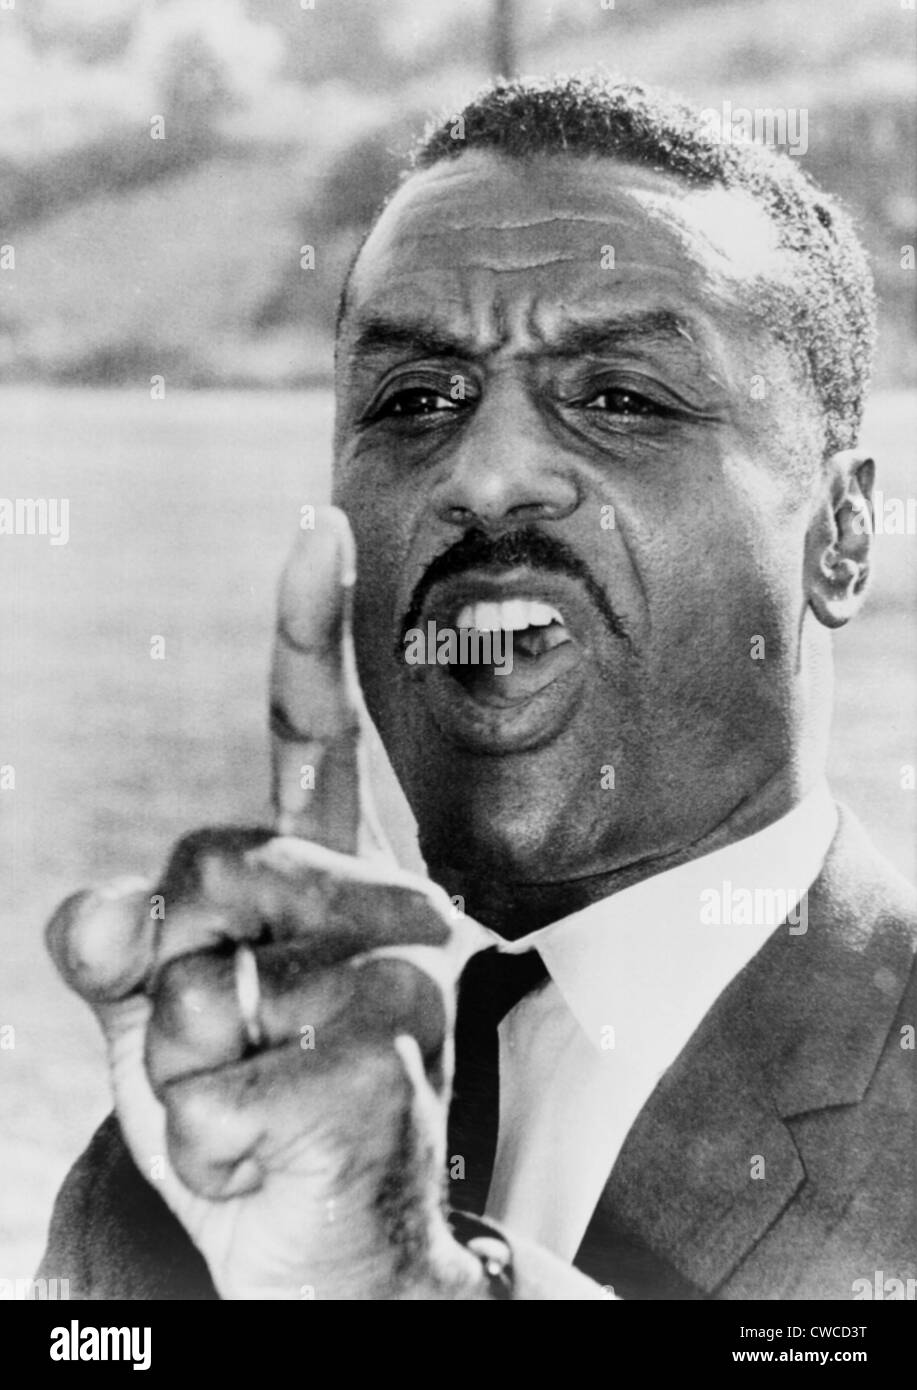 Fred Shuttlesworth, points a finger in warning to Birmingham city officials during the 1963 Civil Rights campaign in the 'most Stock Photo